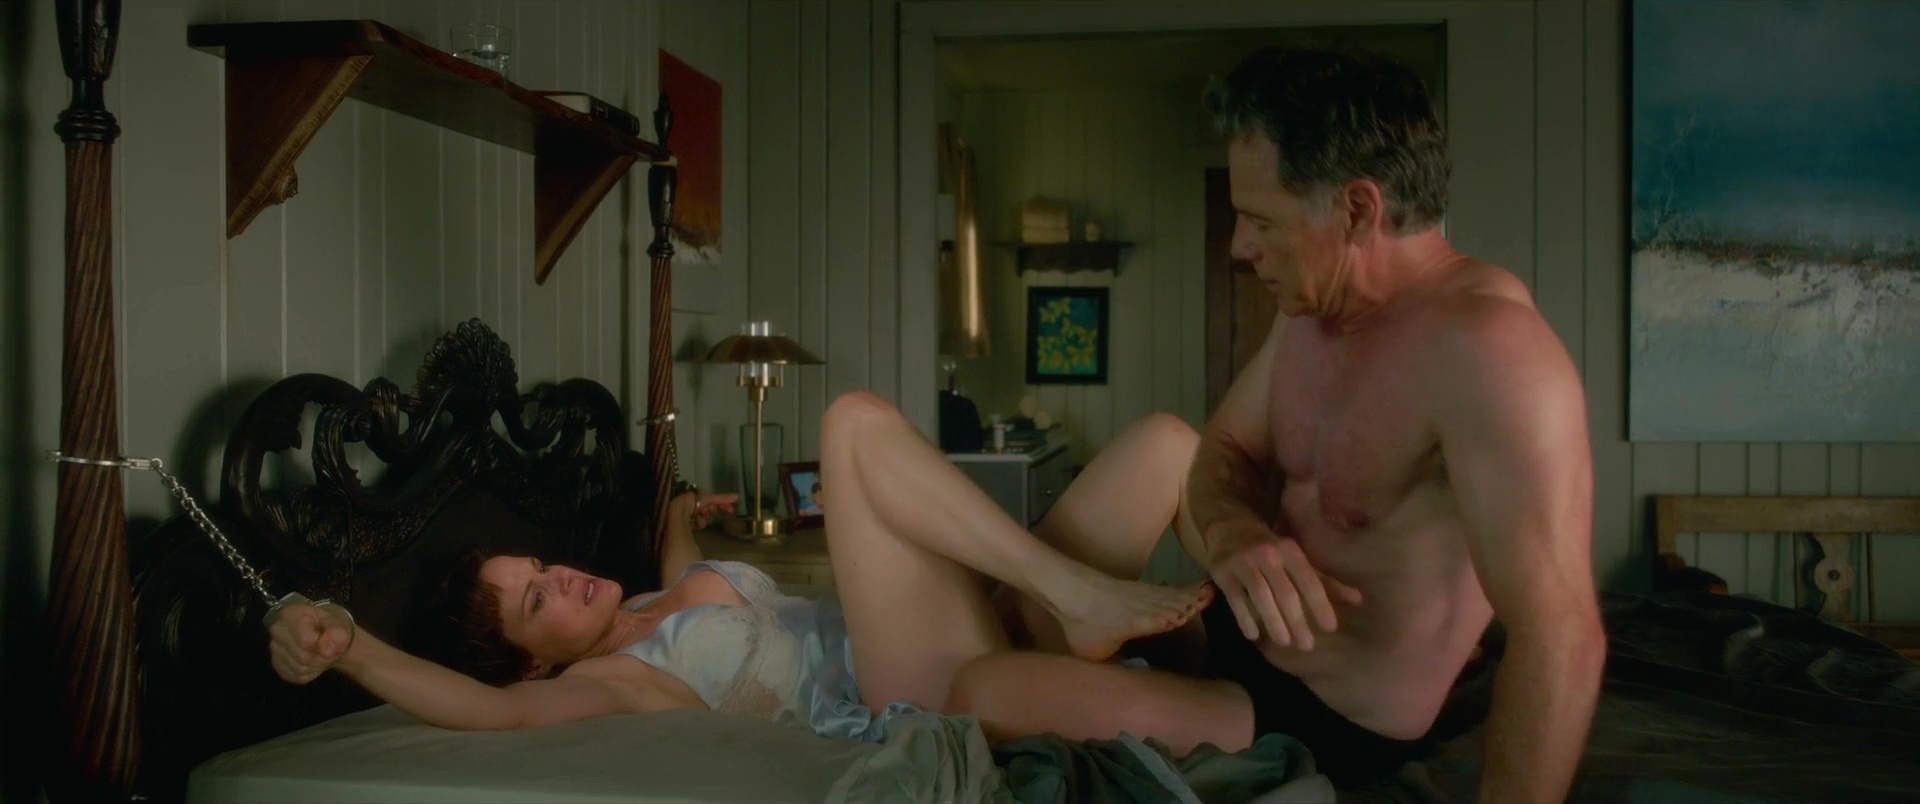 Naked Carla Gugino in Gerald's Game < ANCENSORED